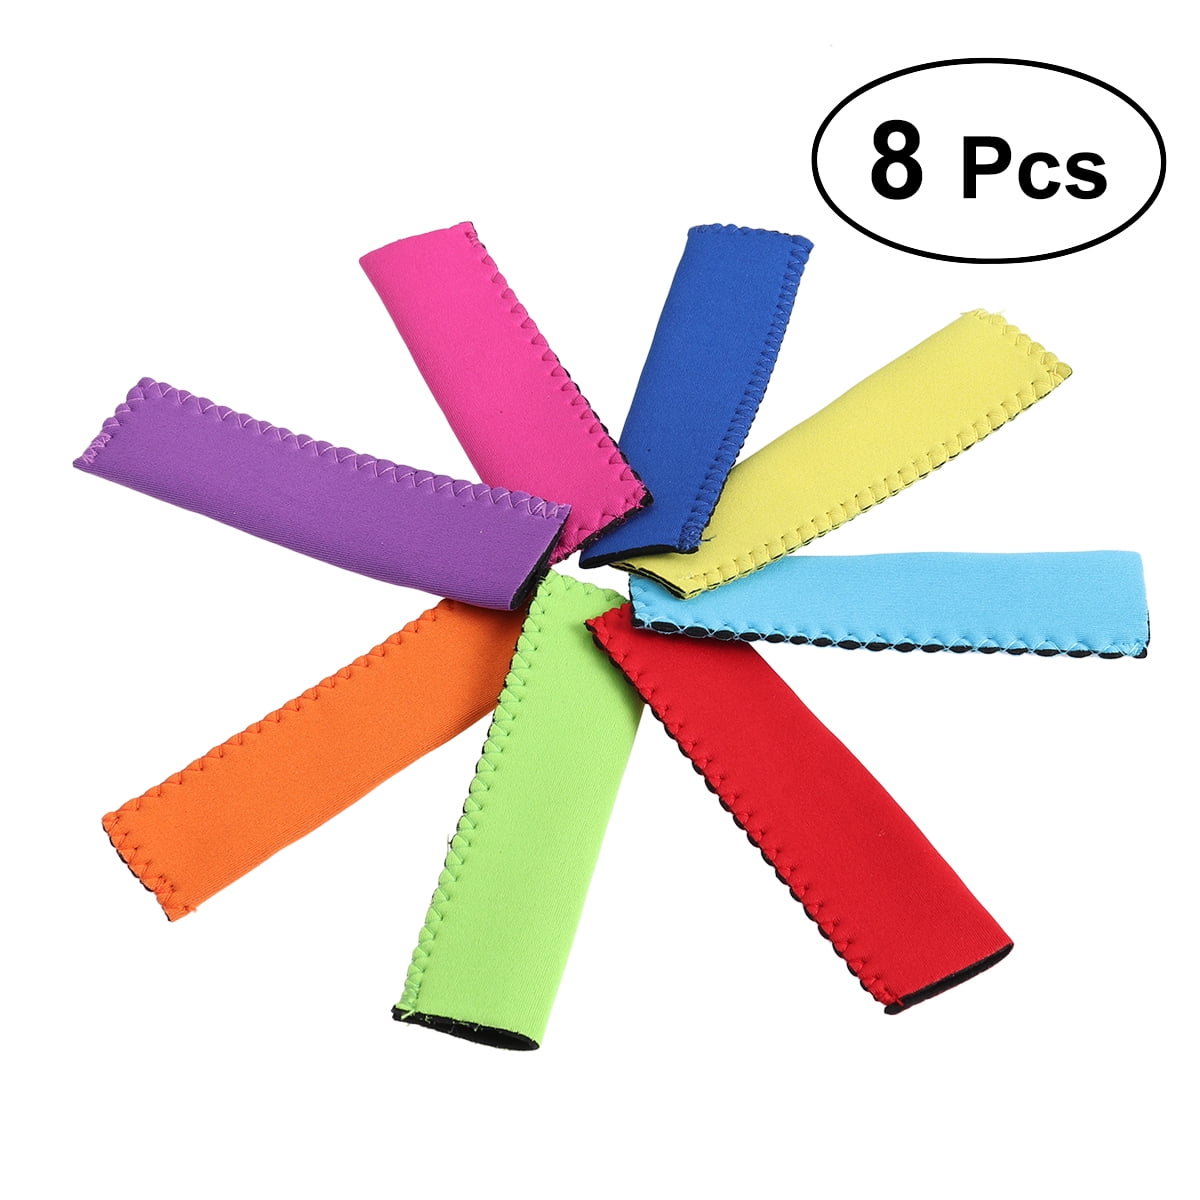 Pack of 6 PCS Popsicle Holders Reusable Popsicle Sleeves for Backyard Barbecues